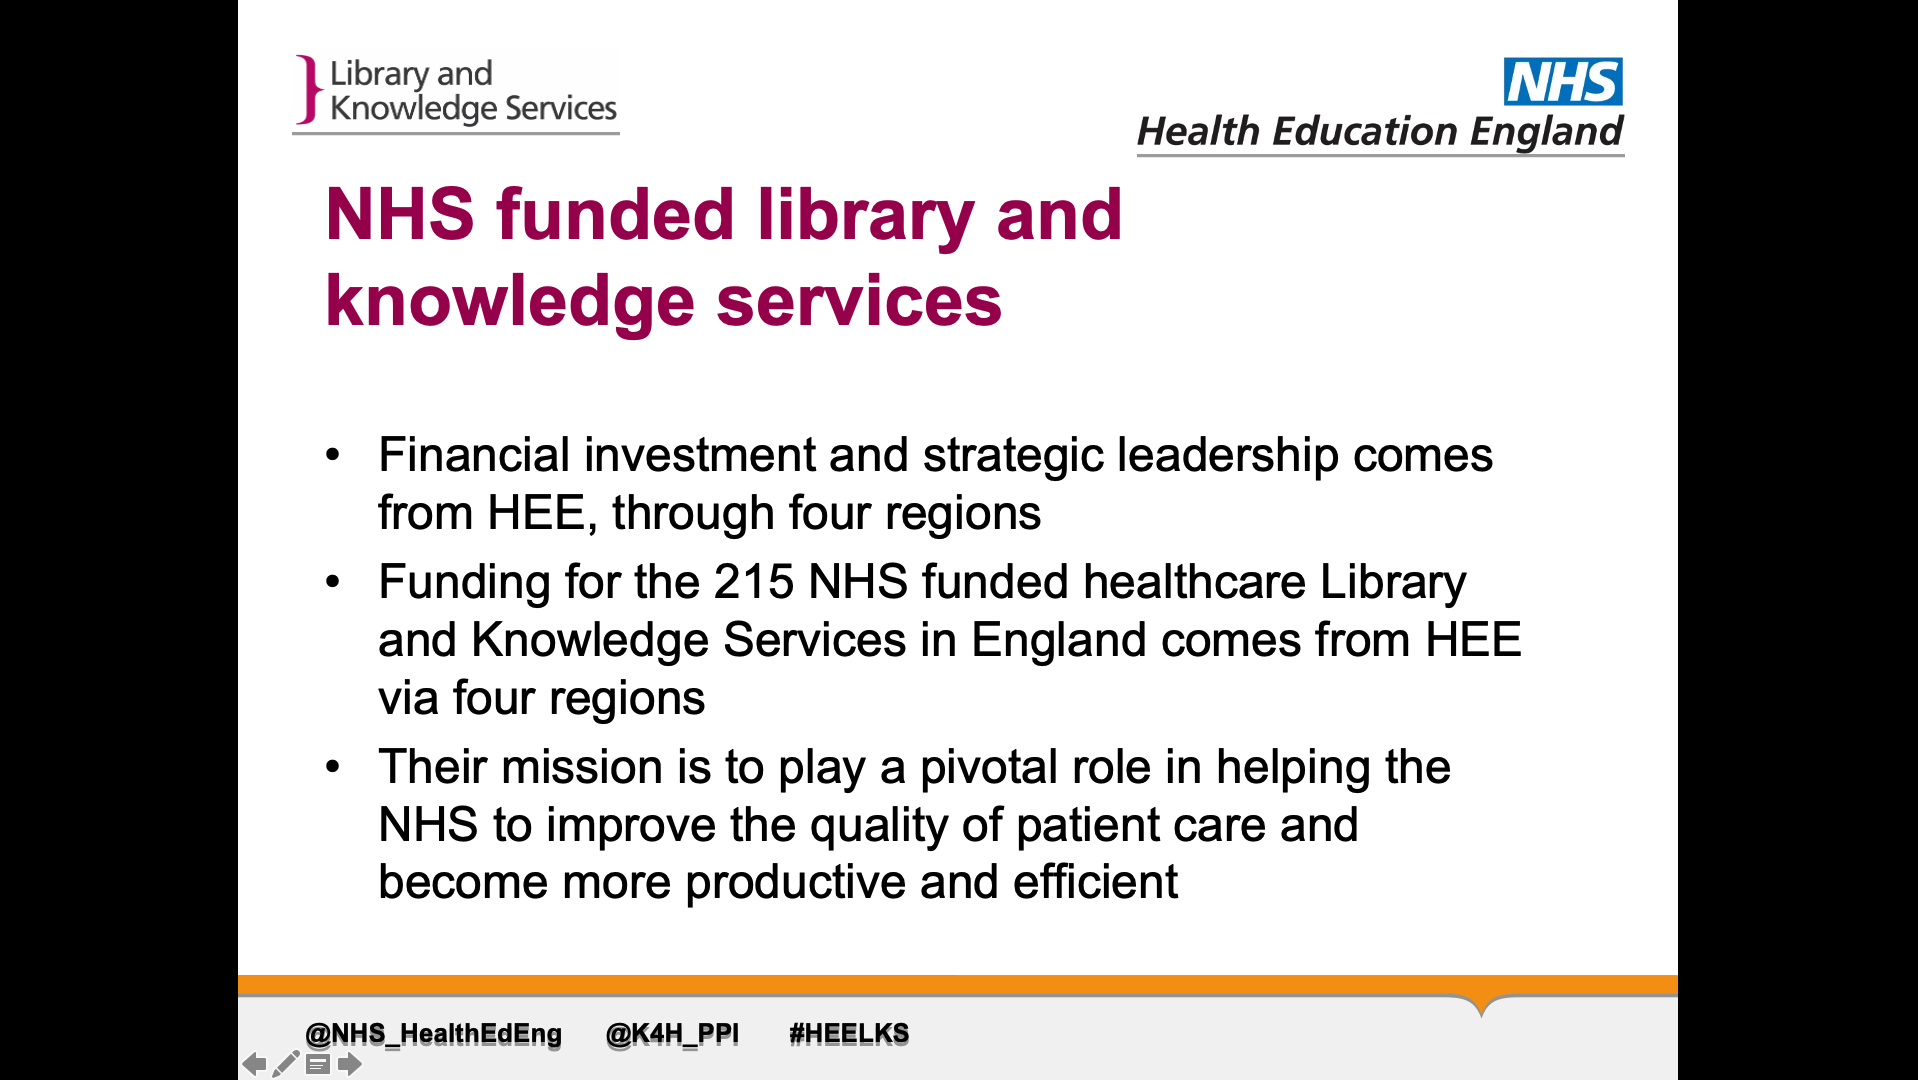 Title: NHS funded library andknowledge services. Text on page: 1. Financial investment and strategic leadership comes from HEE, through four regions  2. Funding for the 215 NHS funded healthcare Library and Knowledge Services in England comes from HEE via four regions 3. Their mission is to play a pivotal role in helping the NHS to improve the quality of patient care and become more productive and efficient